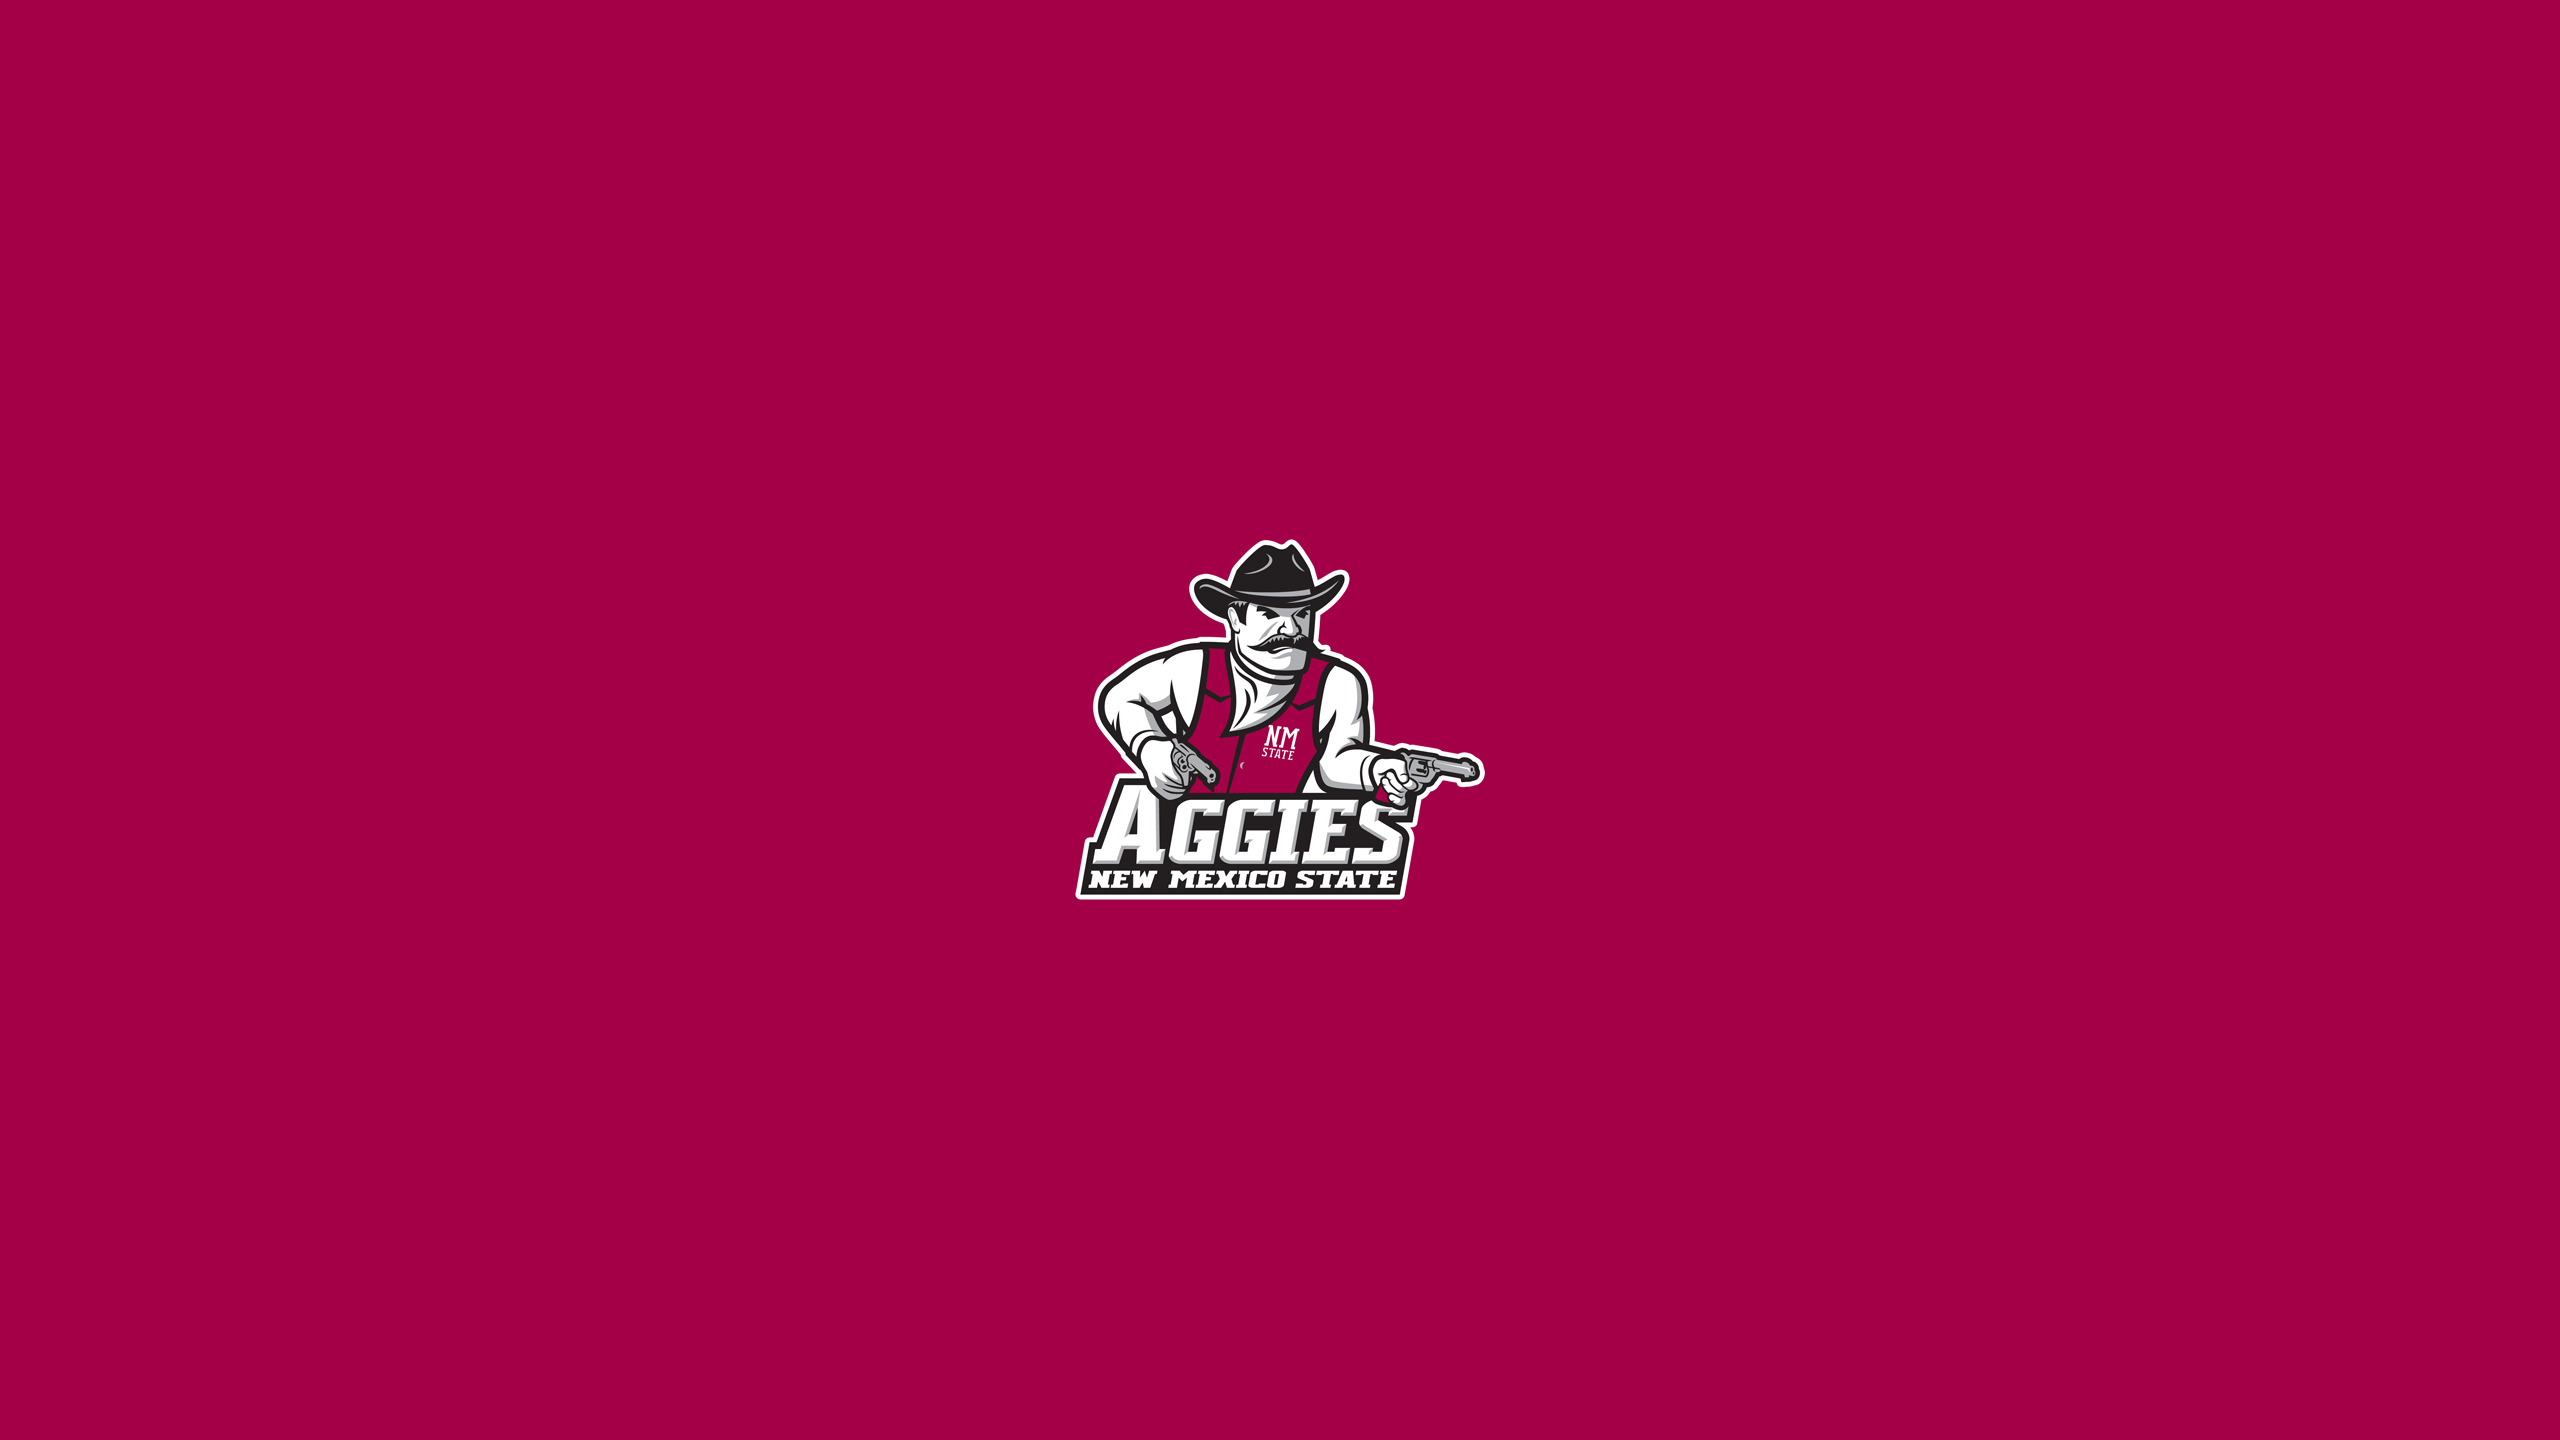 New Mexico State Aggies - Square Bettor